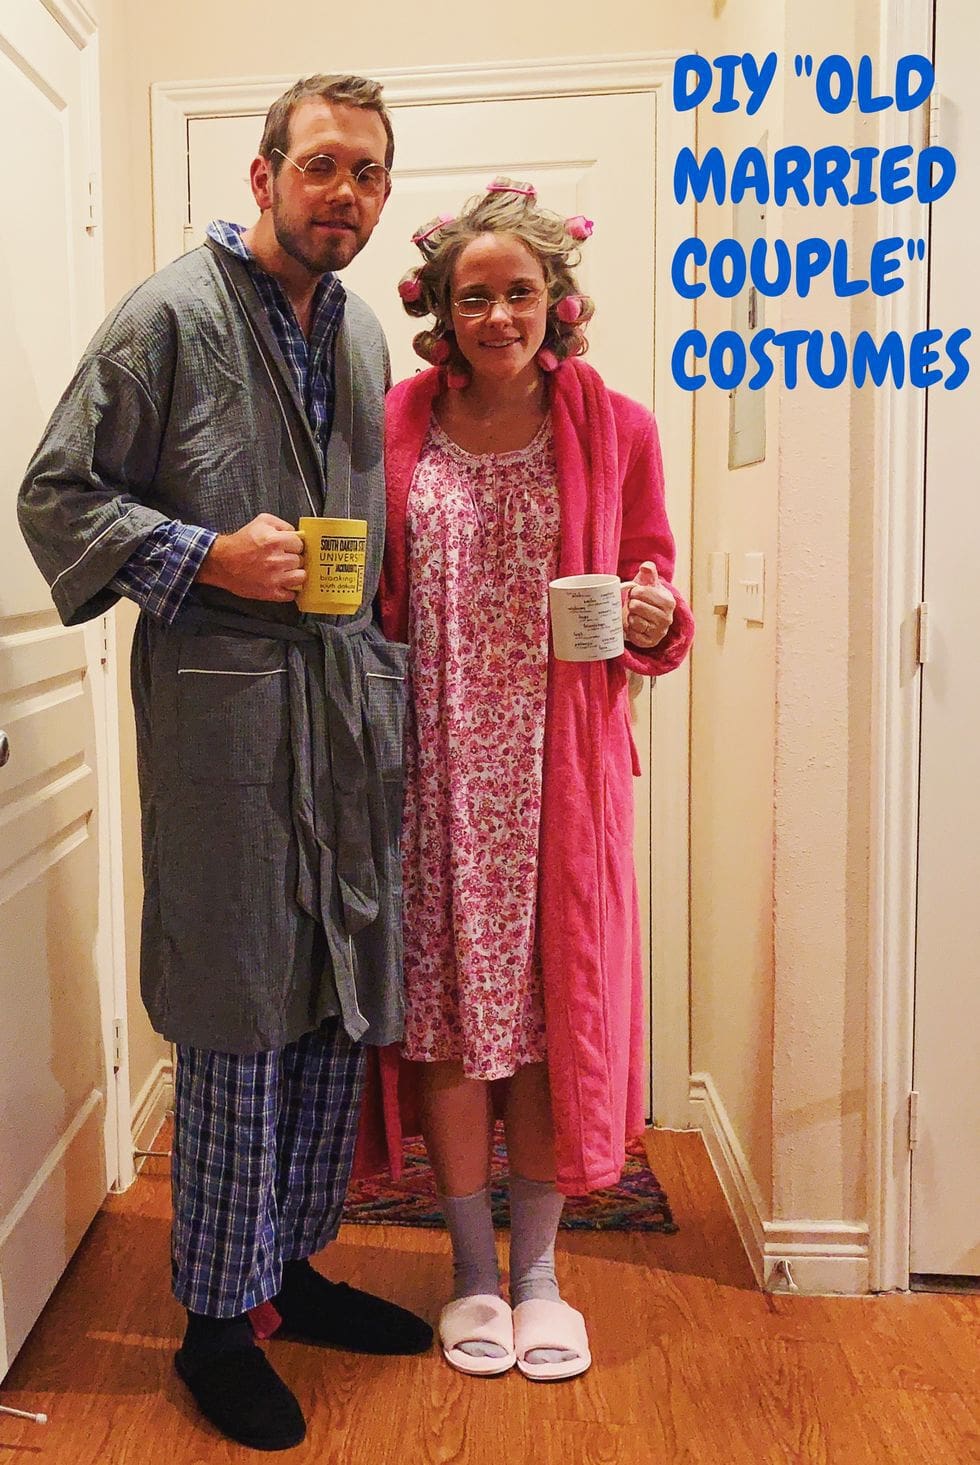 Daily Mom Parent Portal Last Minute Halloween Costumes